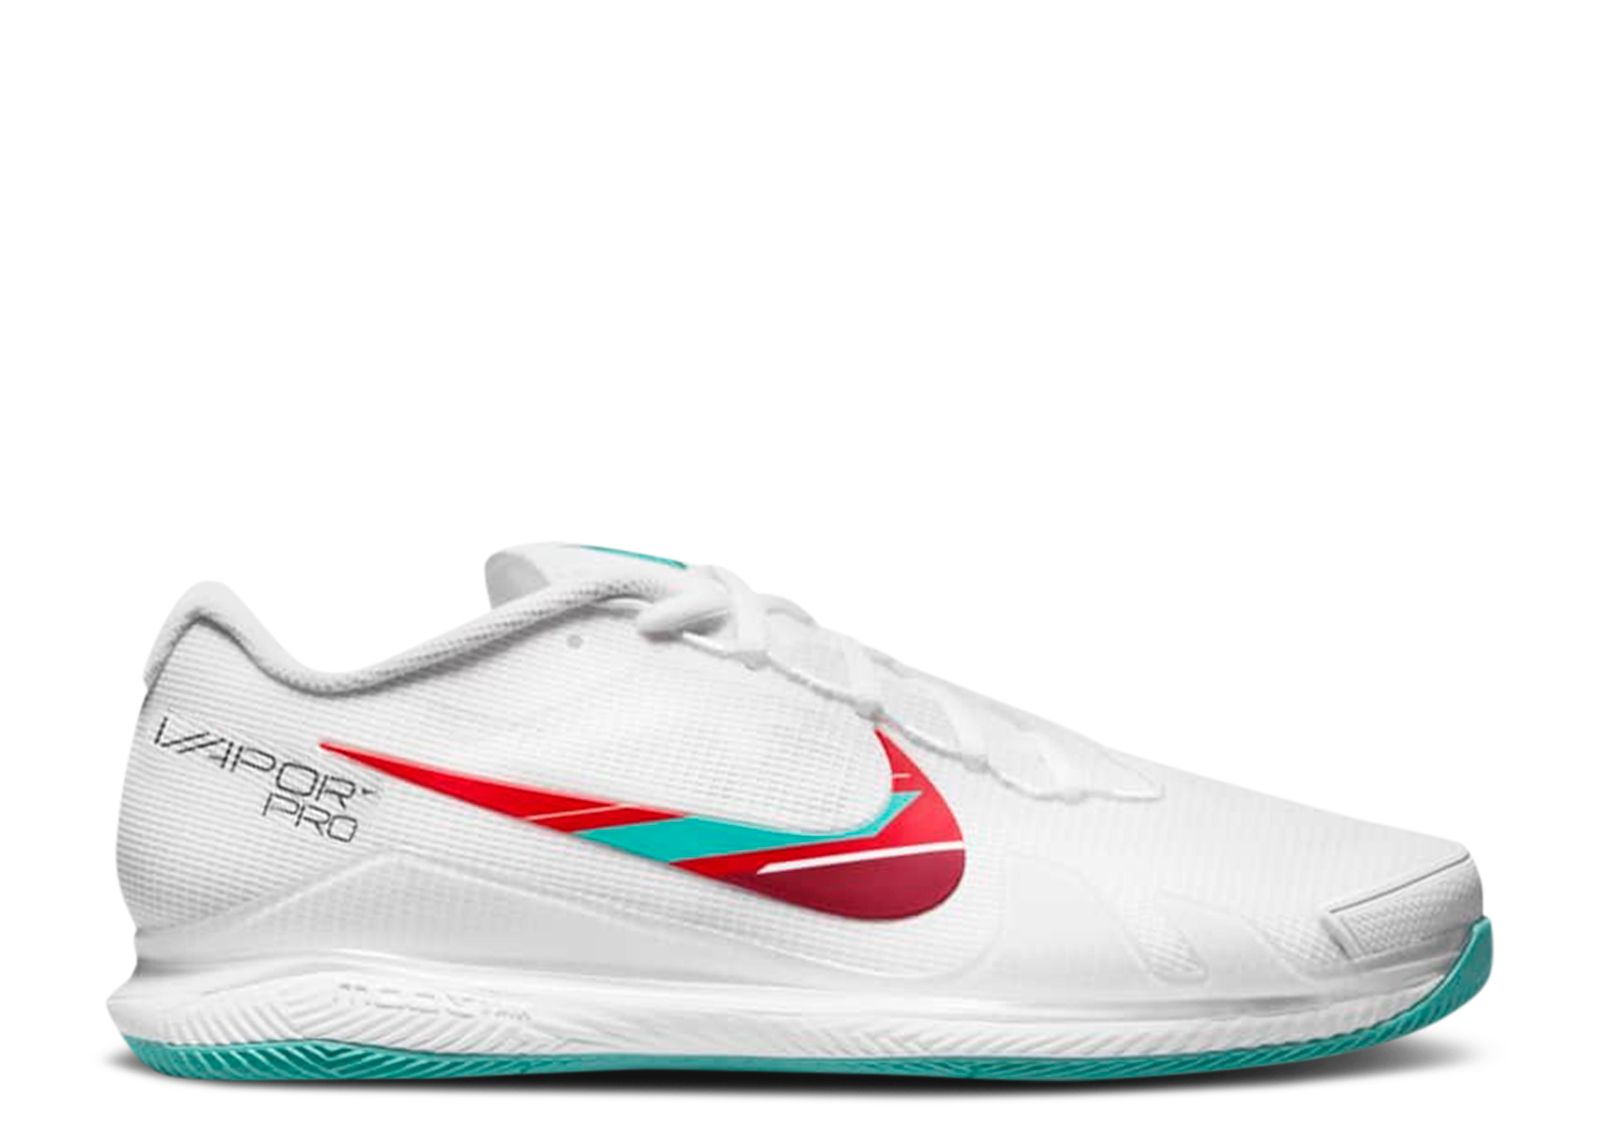 Кроссовки Nike Court Air Zoom Vapor Pro 'White Washed Teal', белый